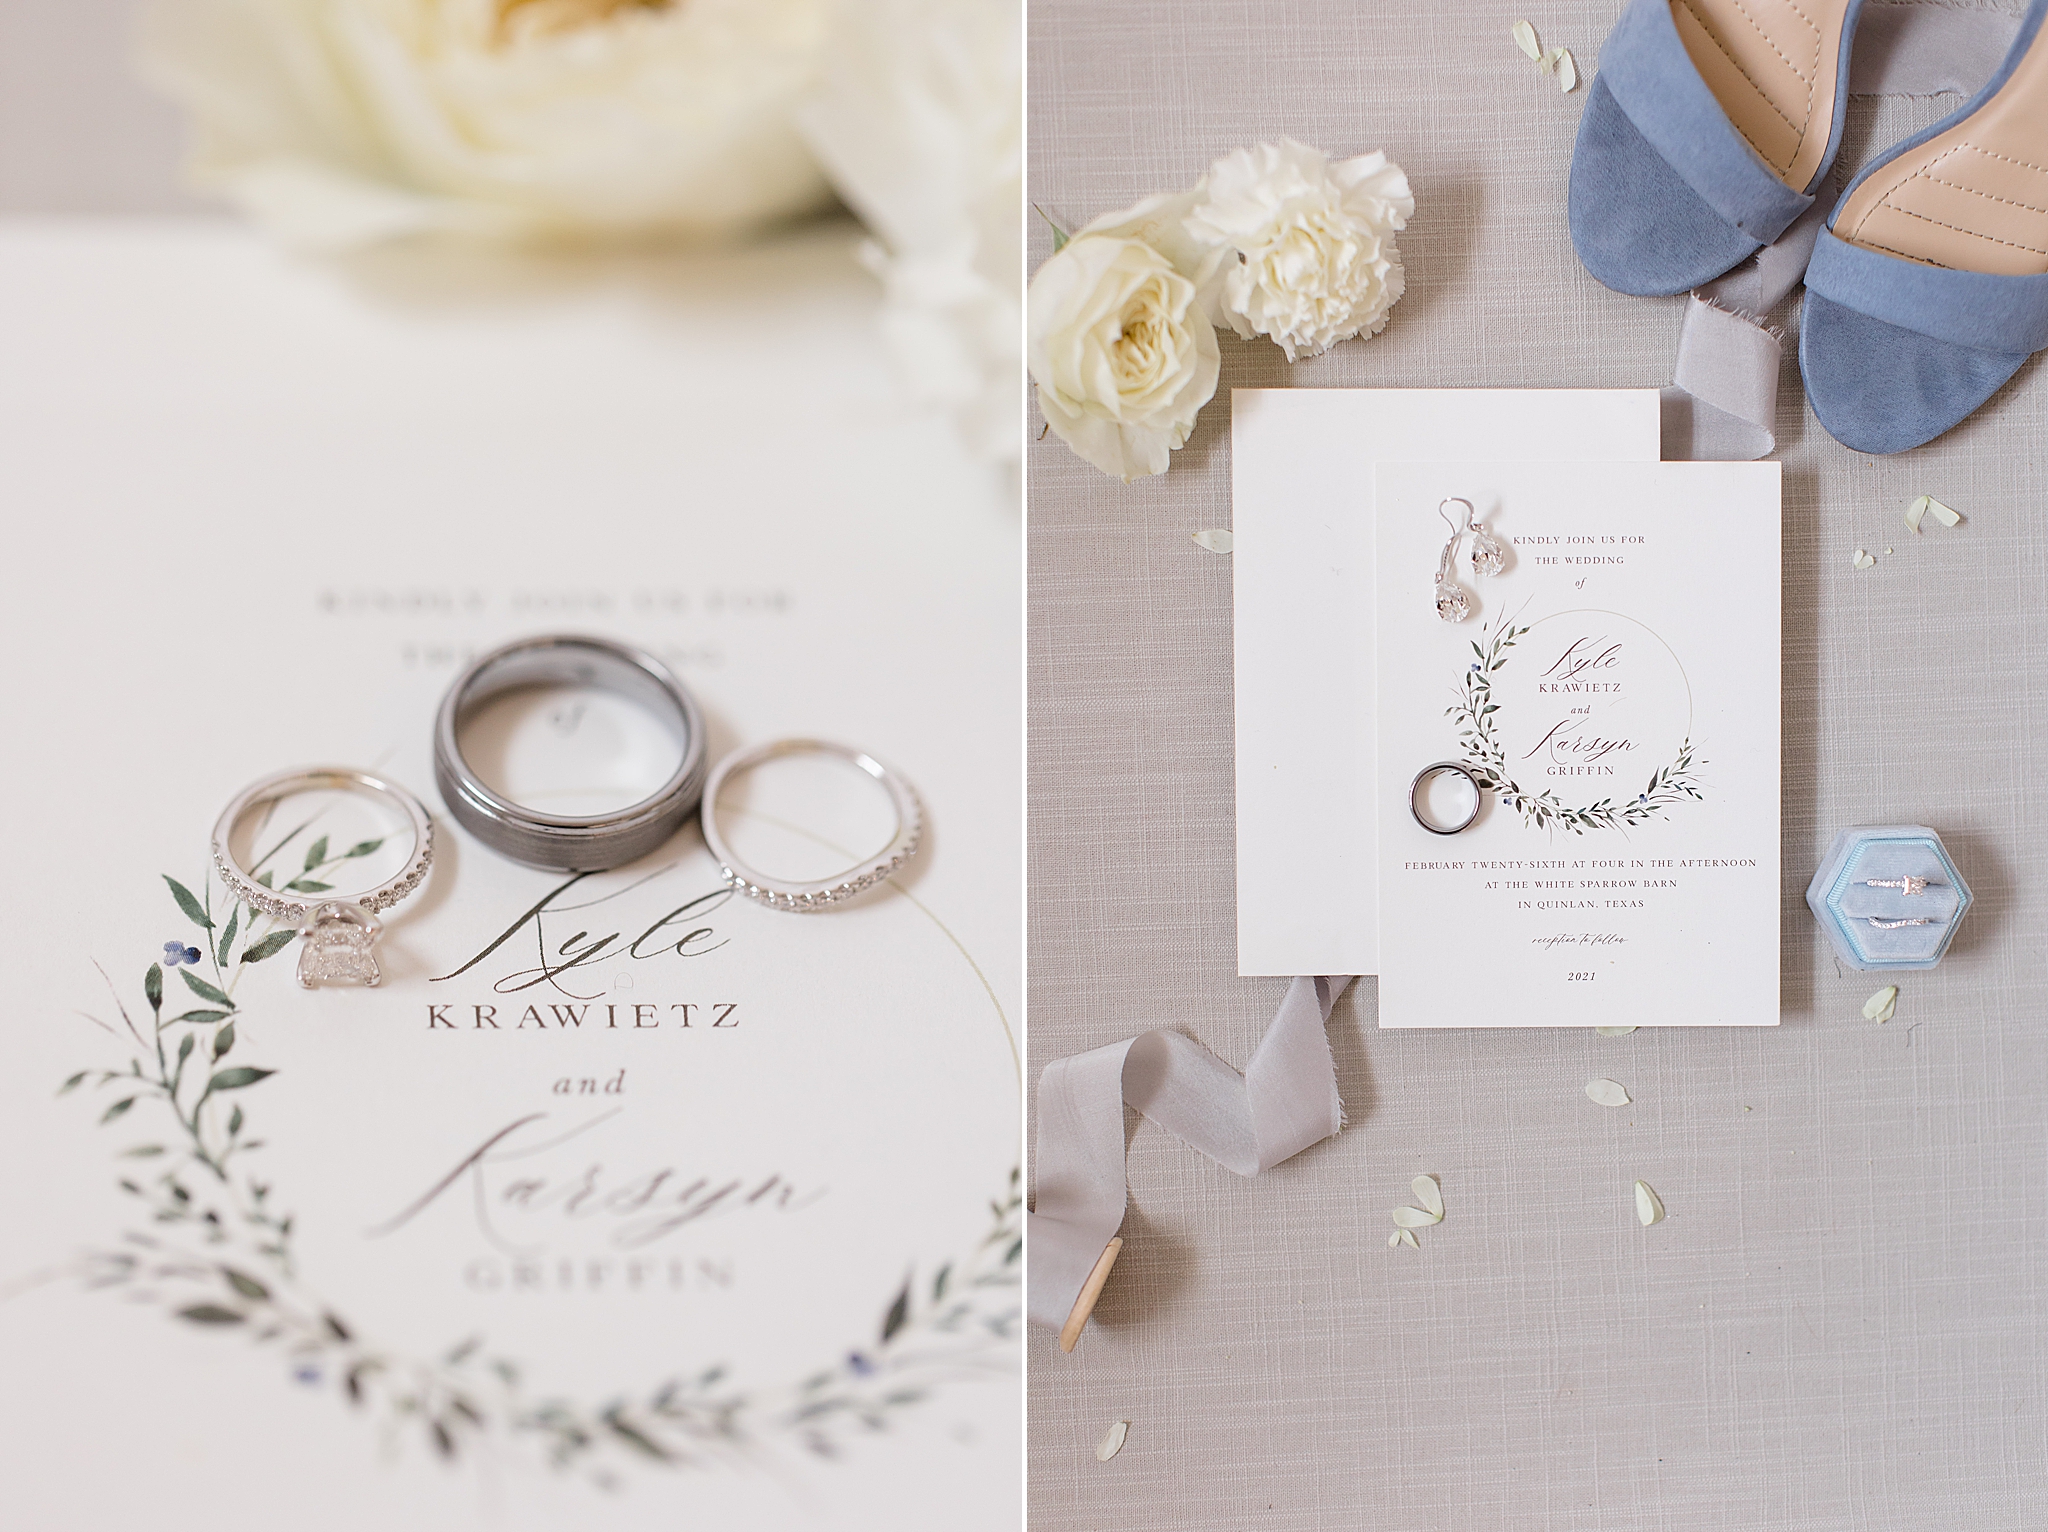 invitation suite for winter wedding at The White Sparrow